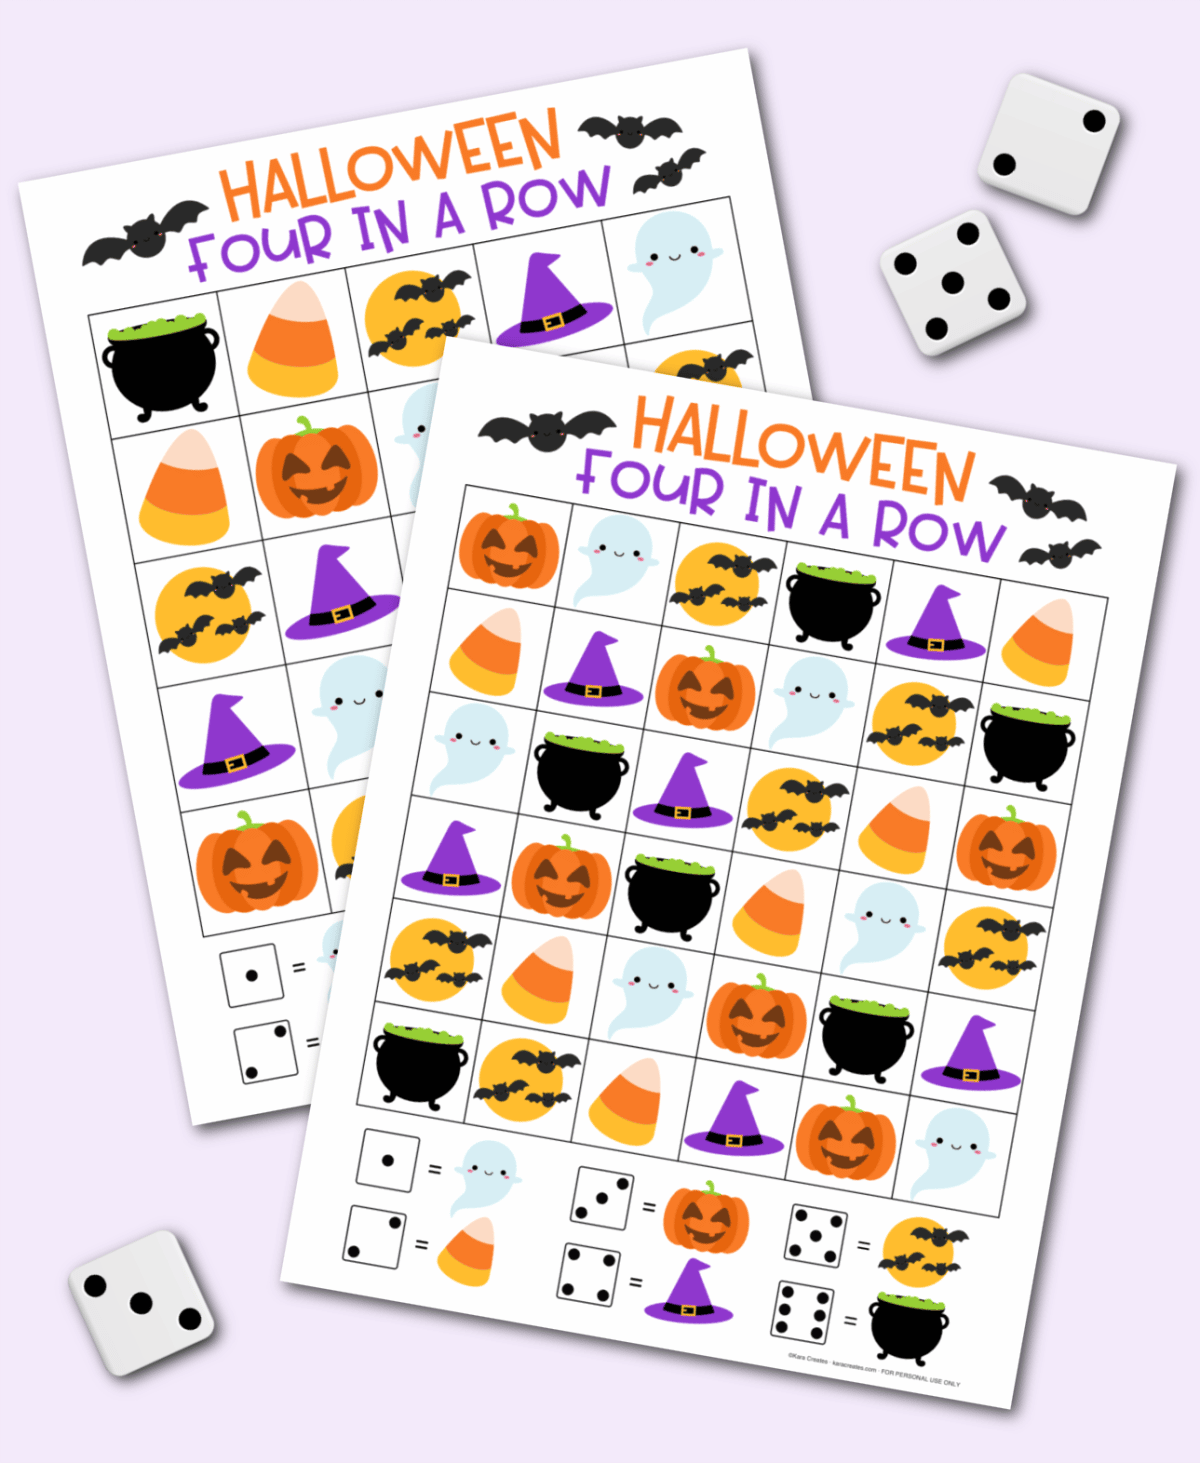 Halloween Four in a Row Printable Game